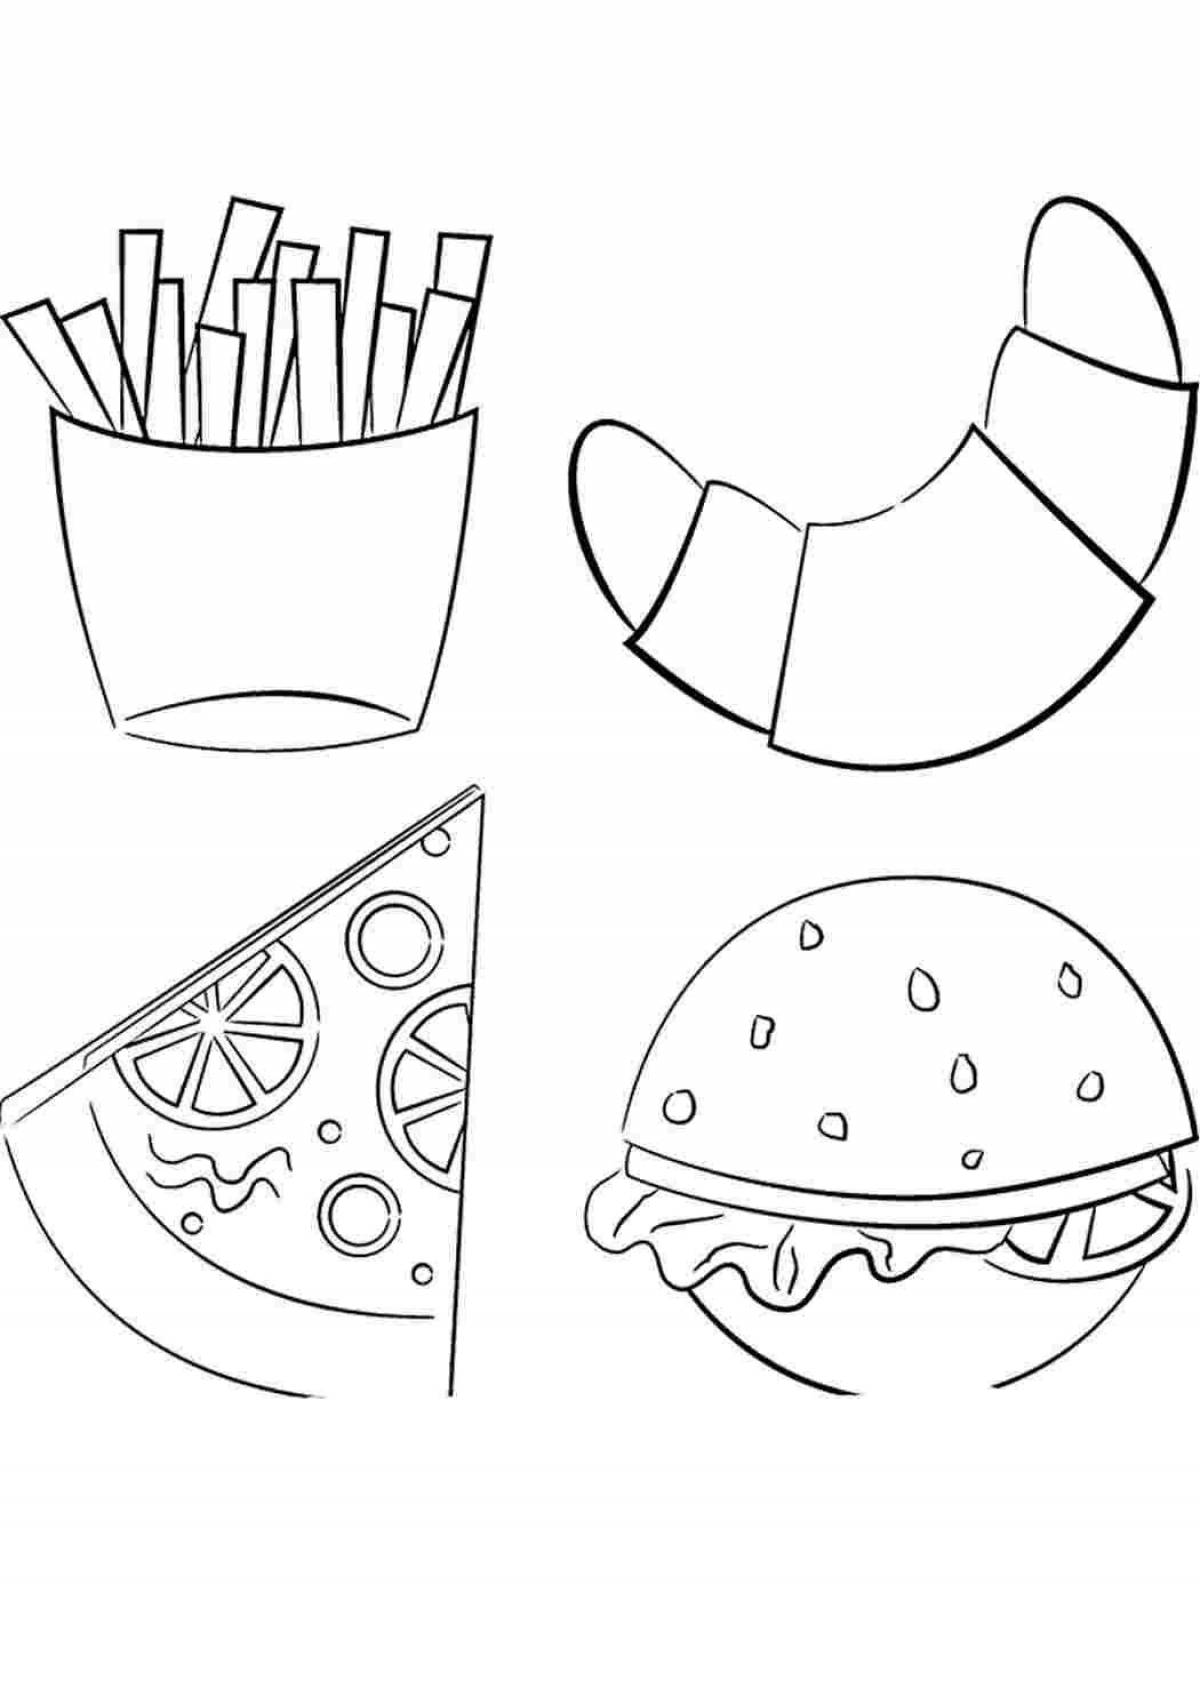 Salty burger and fries coloring page